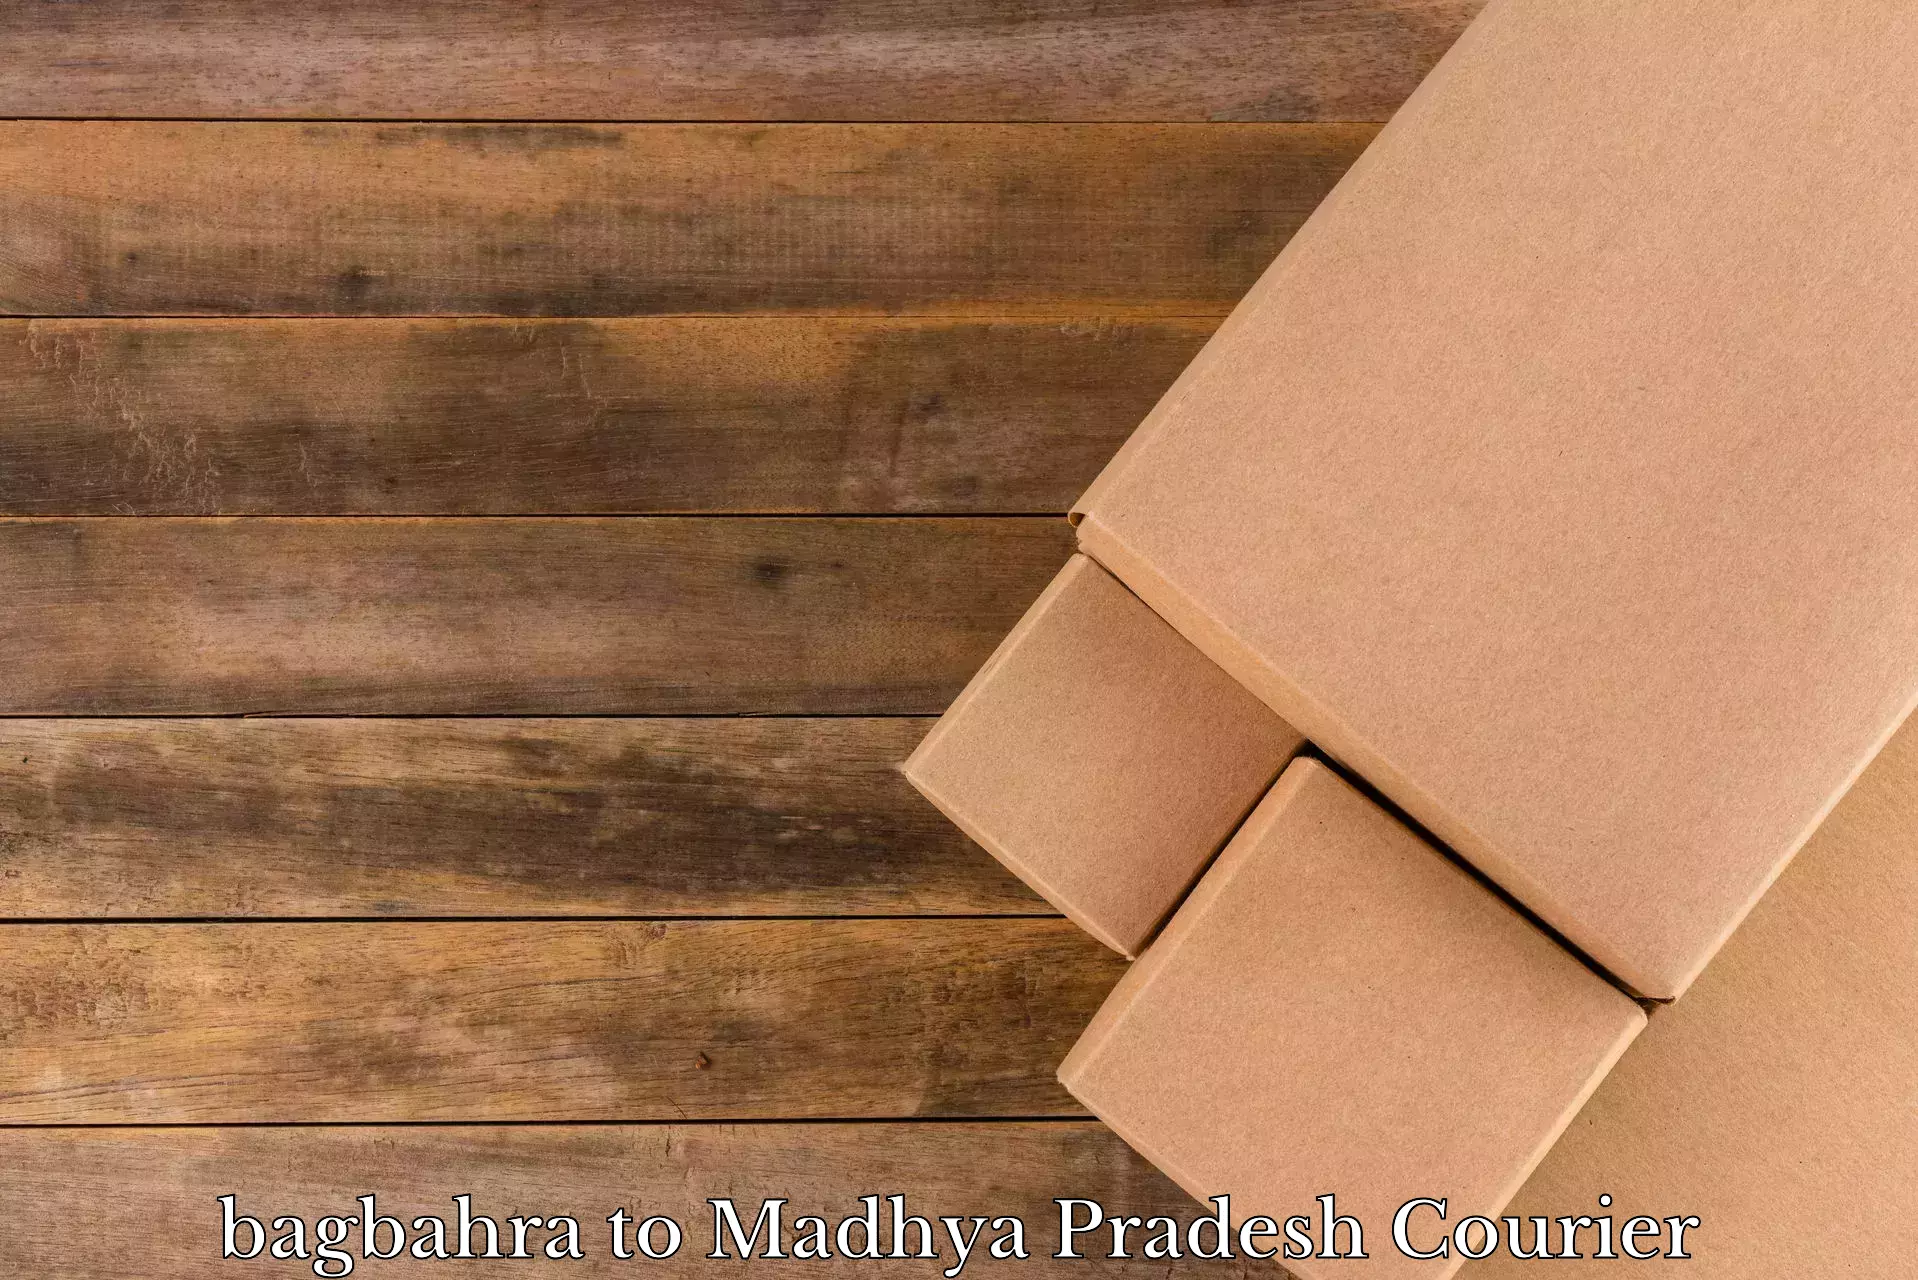 Specialized moving company bagbahra to Niwari